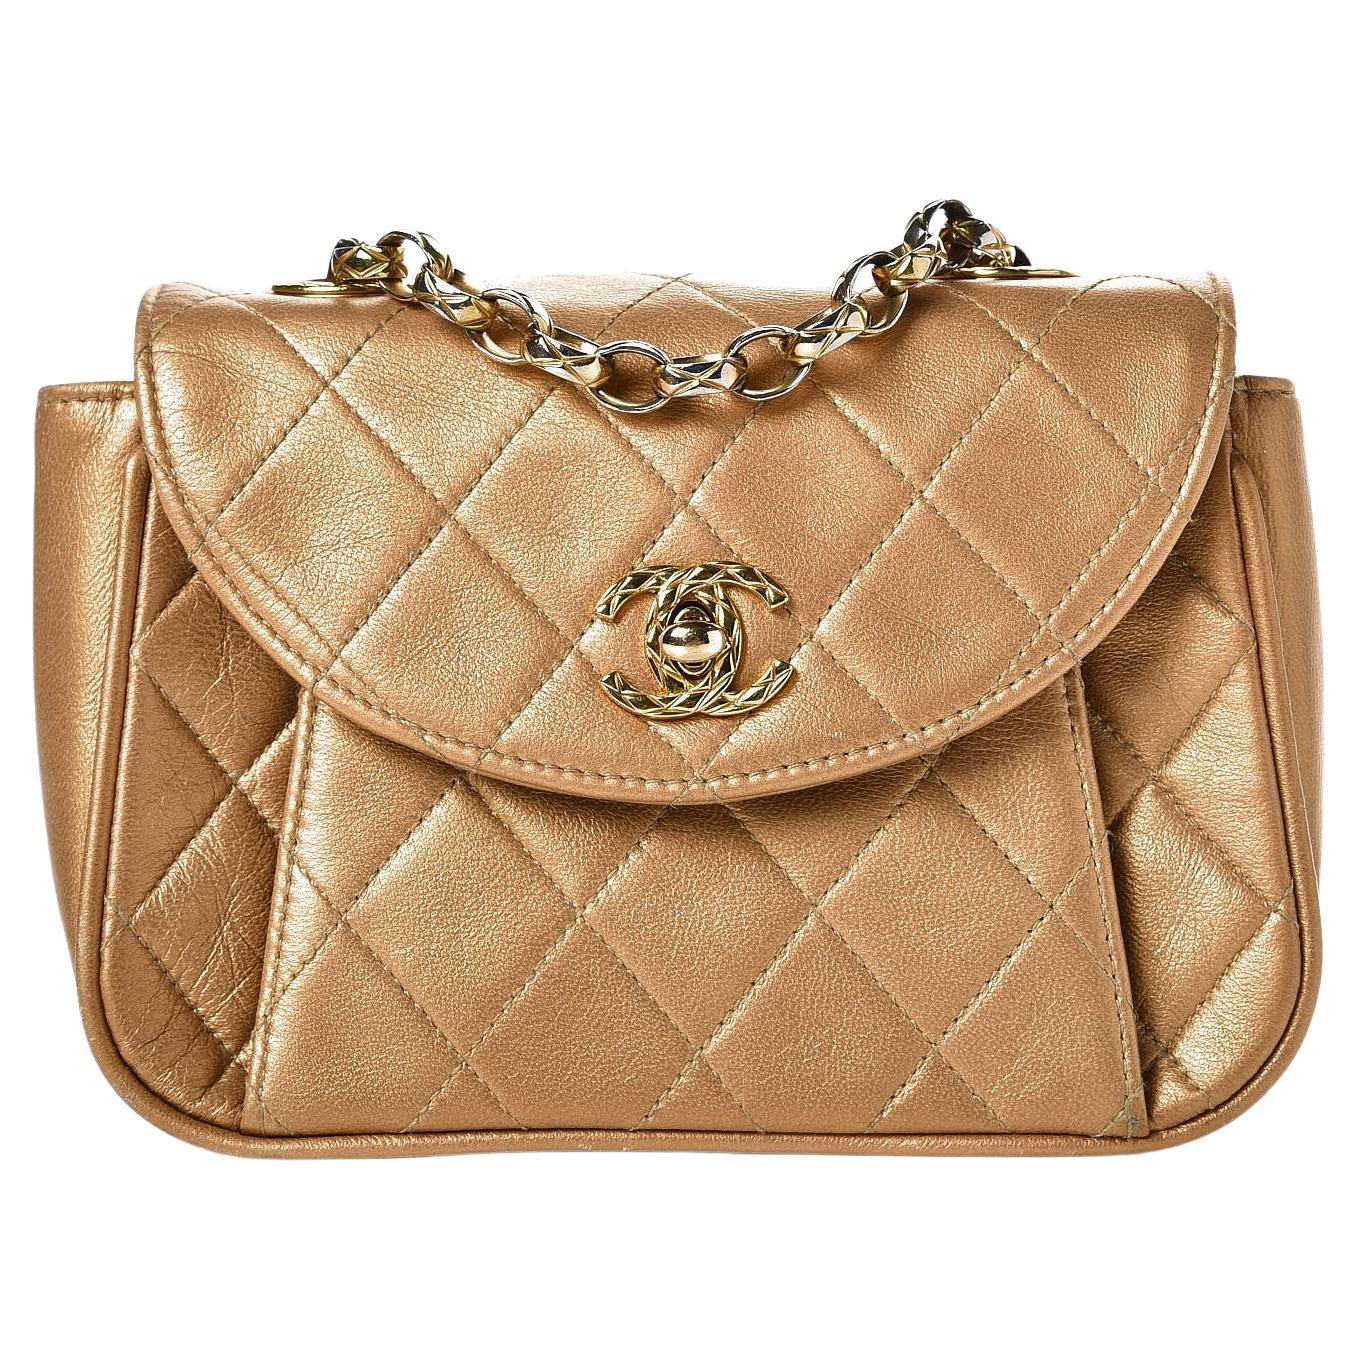 Chanel 1994 Vintage Gold Bronze Metallic Lambskin Mini Quilted Classic Flap Bag For Sale